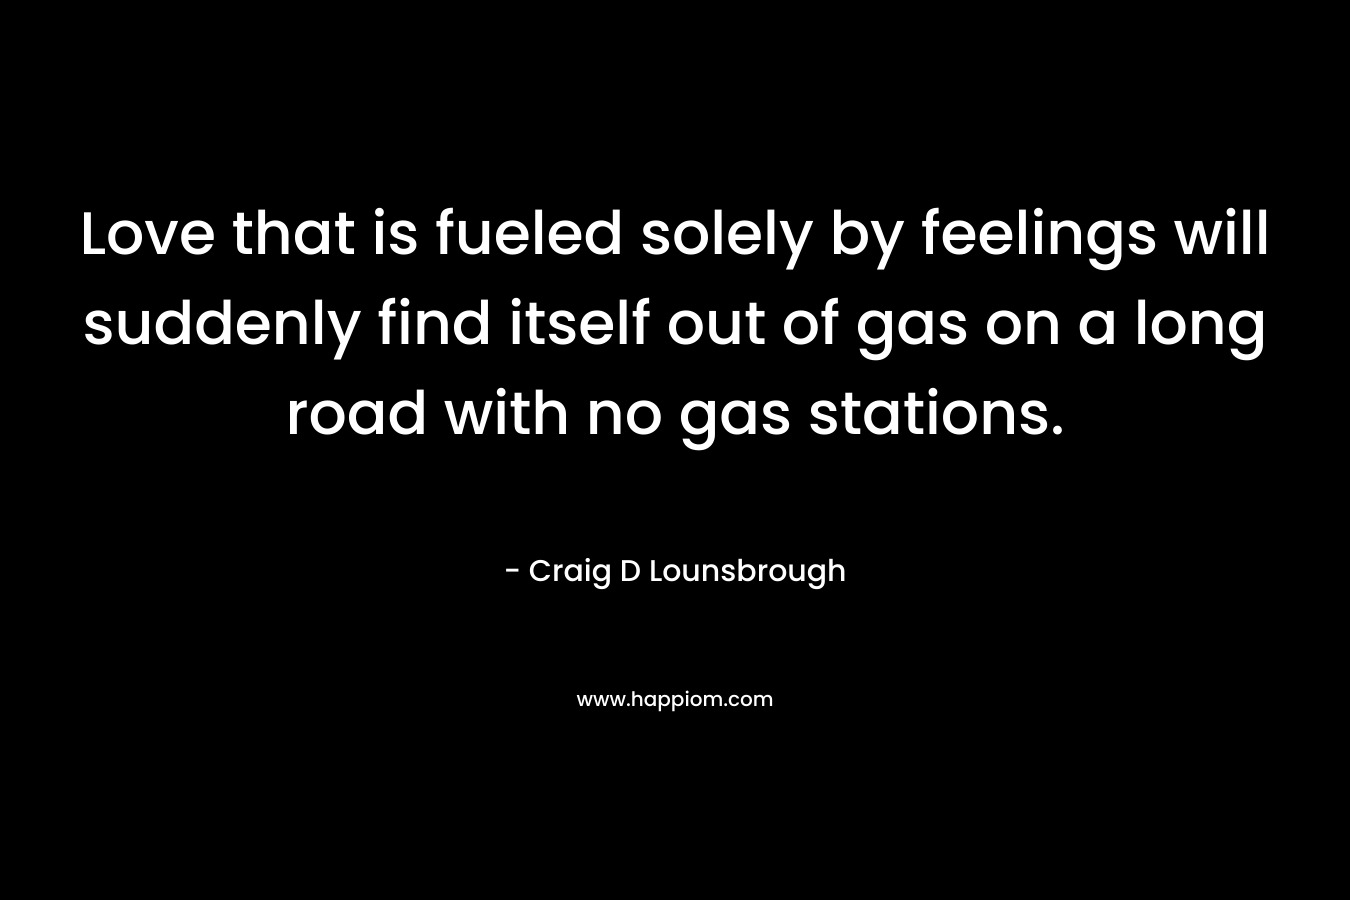 Love that is fueled solely by feelings will suddenly find itself out of gas on a long road with no gas stations. – Craig D Lounsbrough